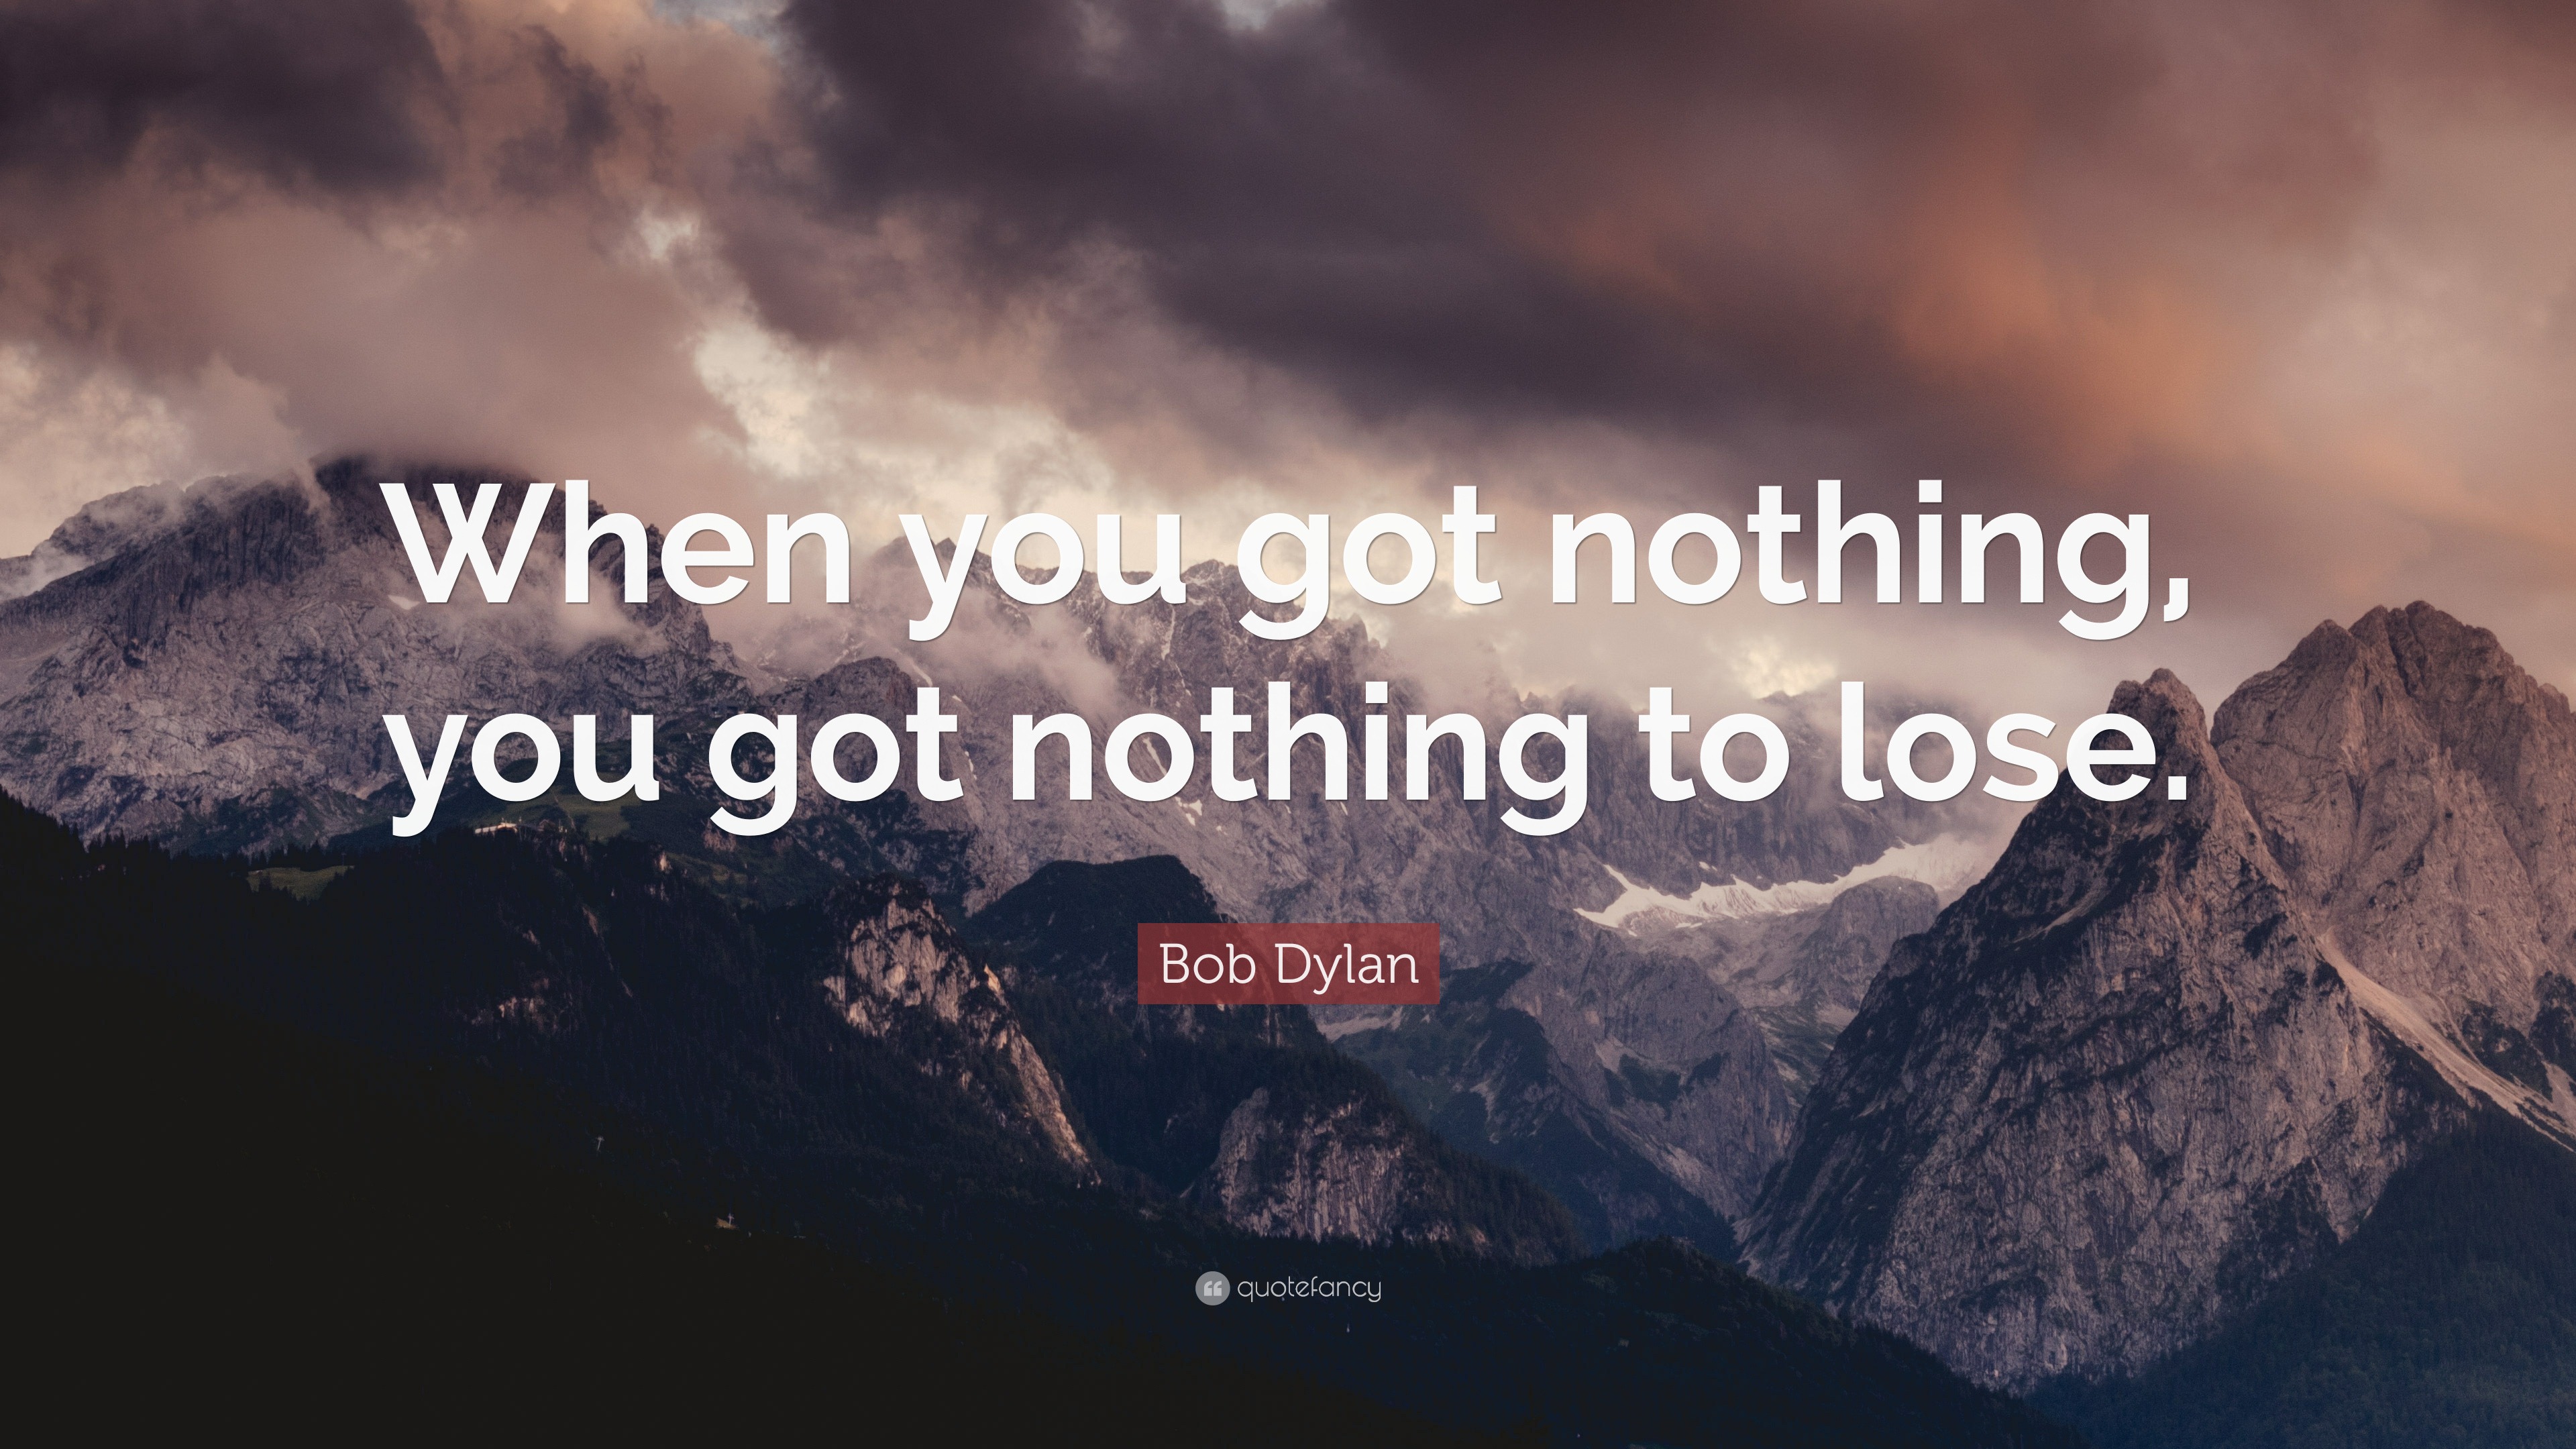 https://quotefancy.com/media/wallpaper/3840x2160/2008720-Bob-Dylan-Quote-When-you-got-nothing-you-got-nothing-to-lose.jpg